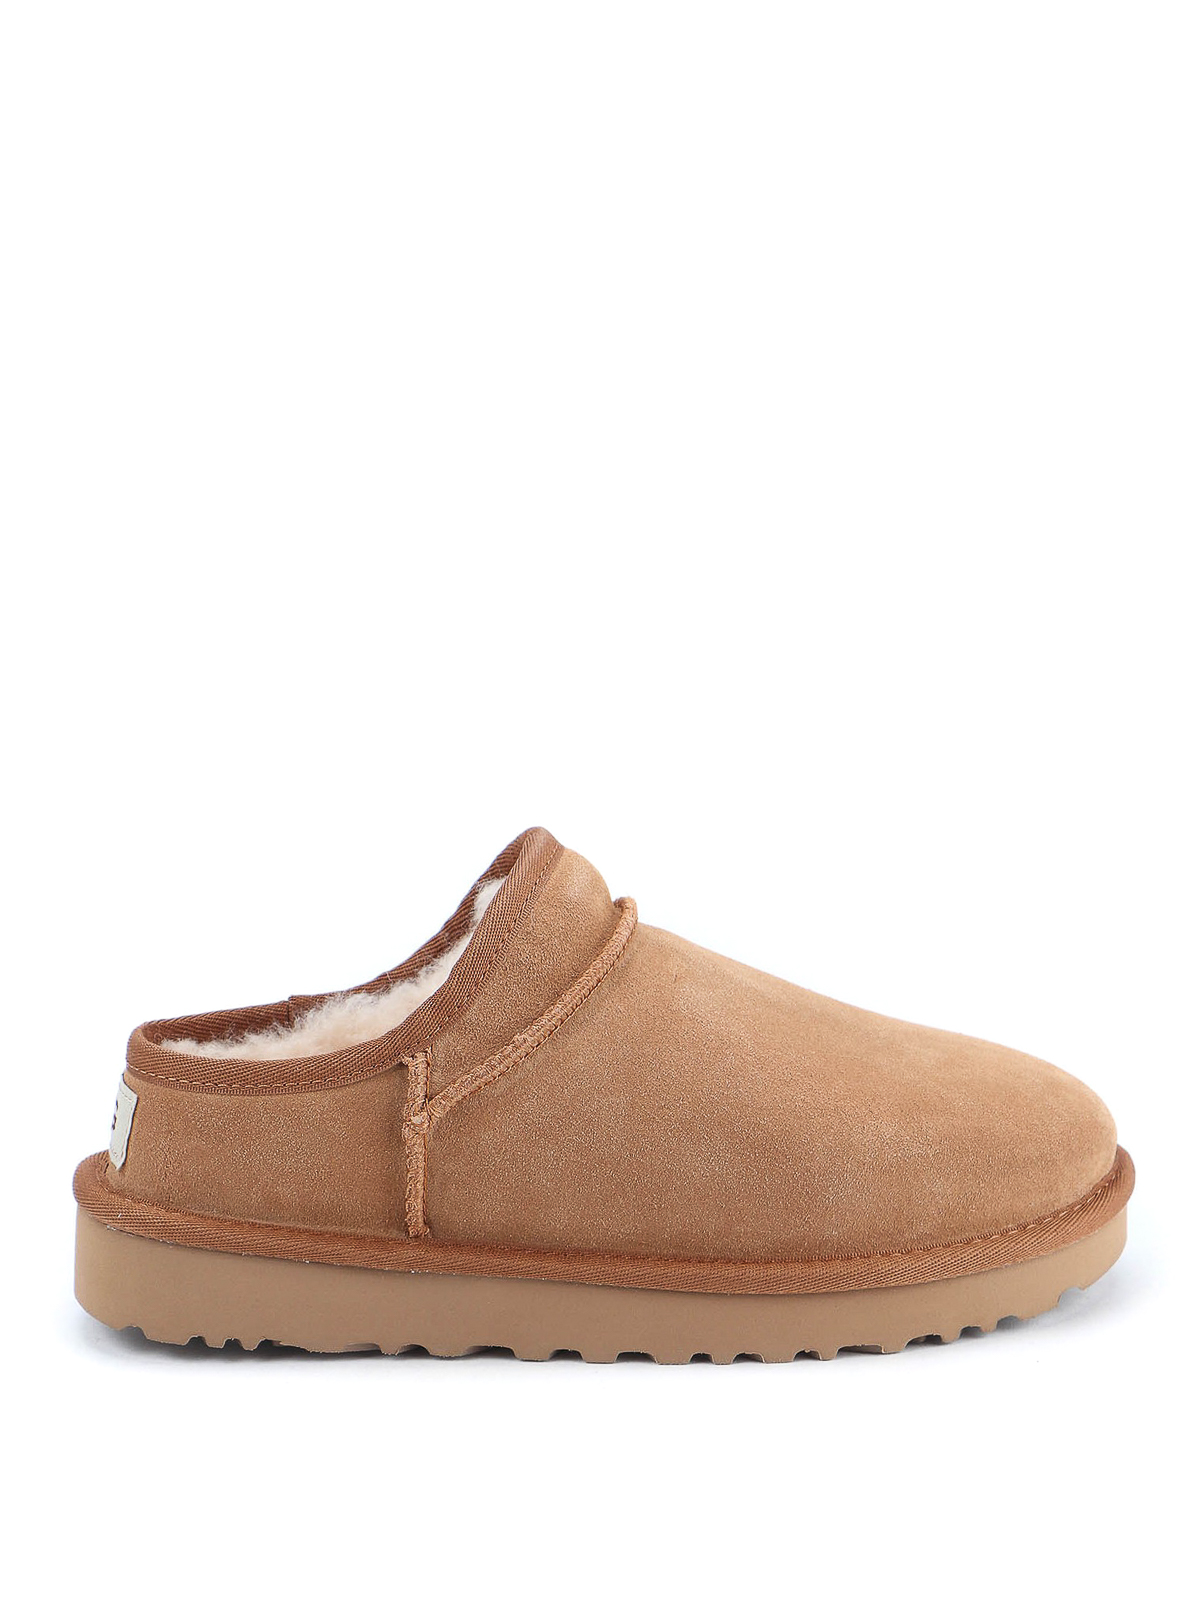 ugg suede slippers